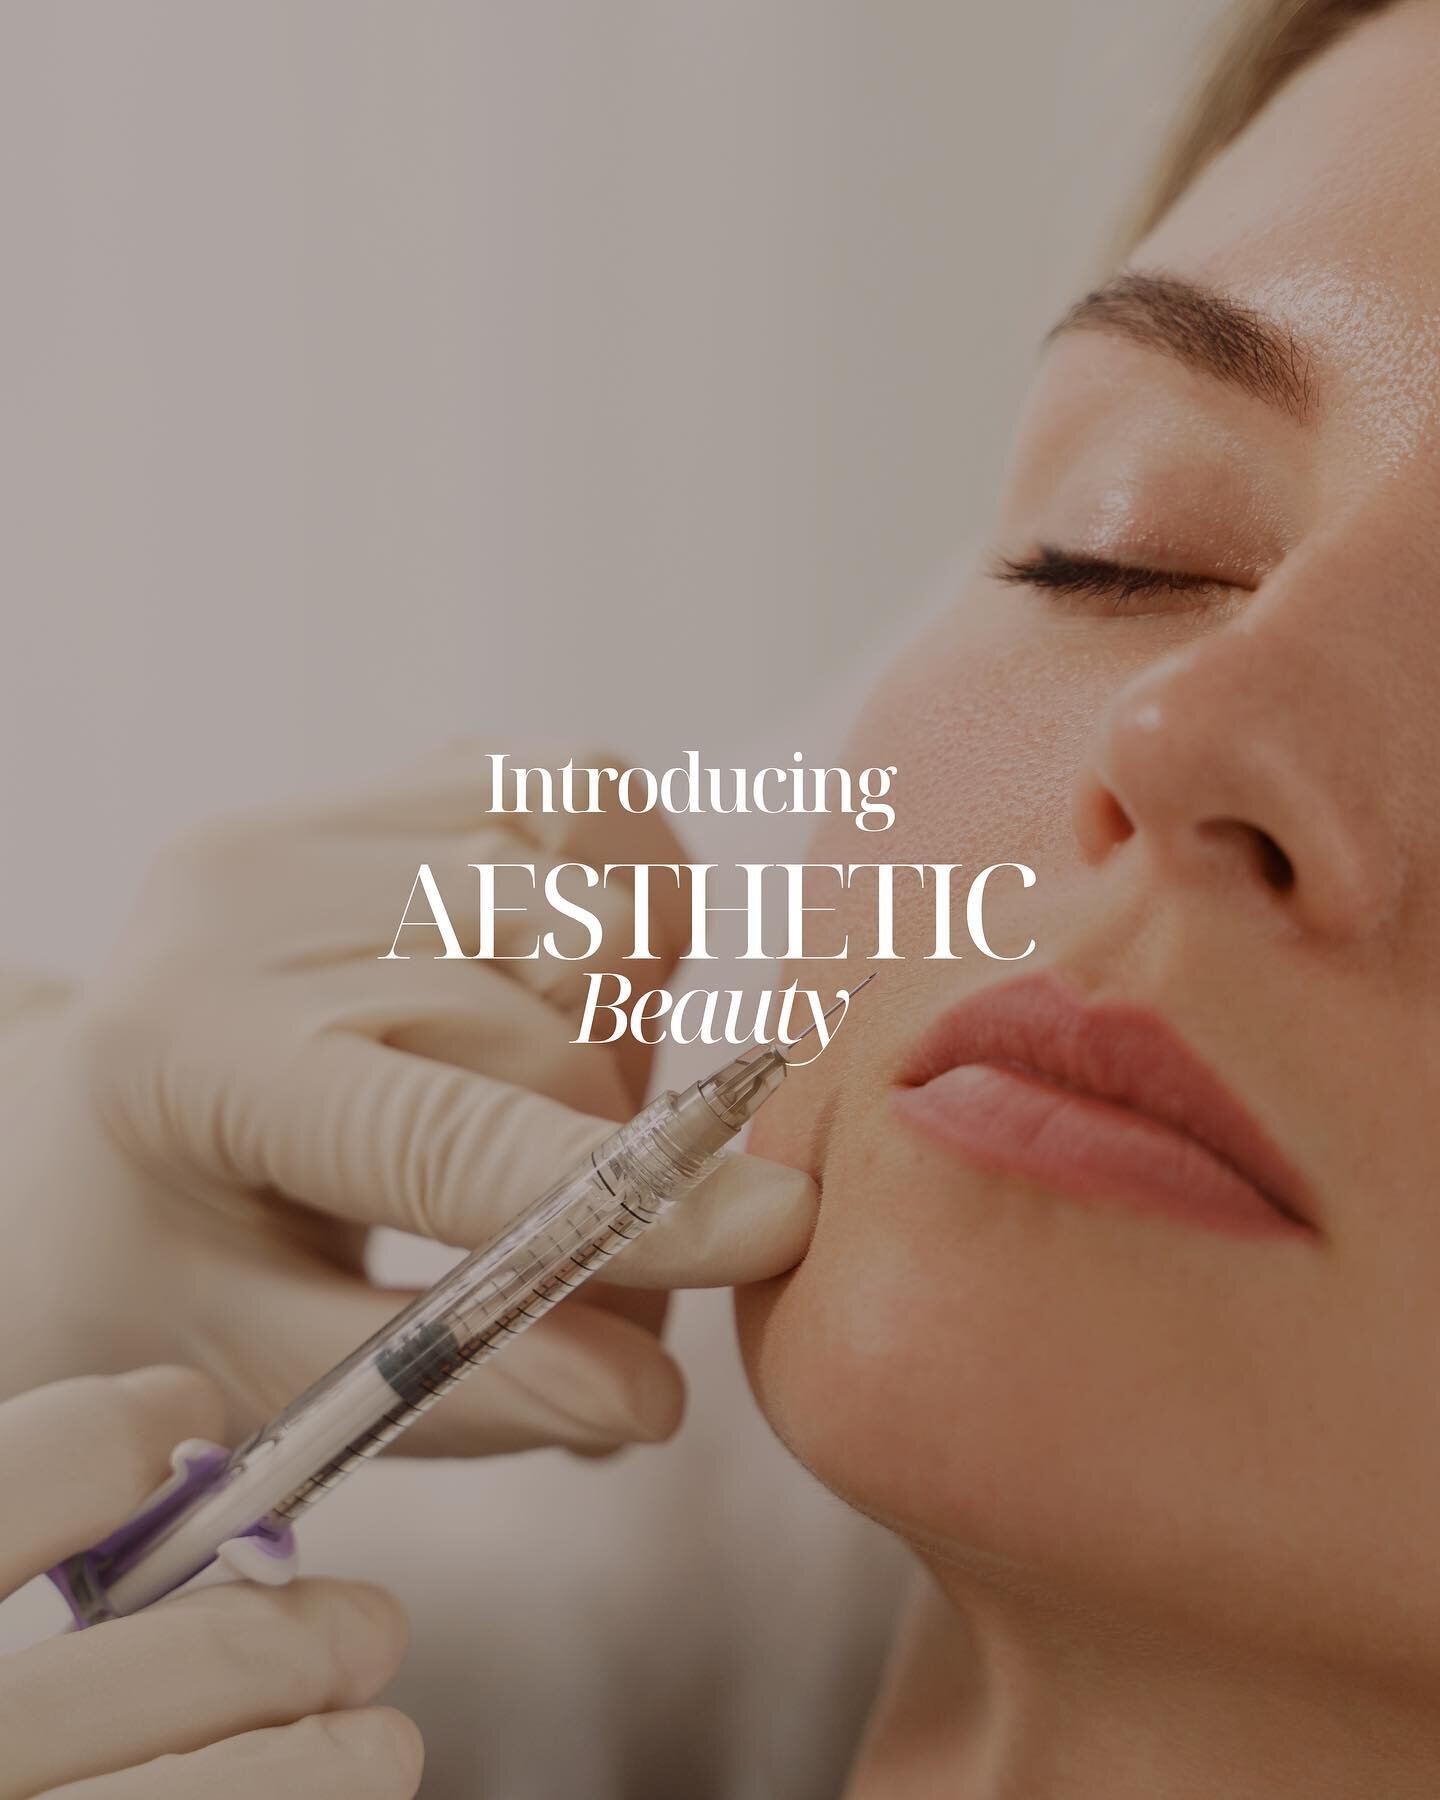 ANNOUNCING &hellip; another NEW service for MODE 😍😍

You&rsquo;ve heard it here first we&rsquo;re SO excited to be launching aesthetic services at MODE, ran by the talented Natalie 😍

This service really does make the MODE team an all inclusive ex